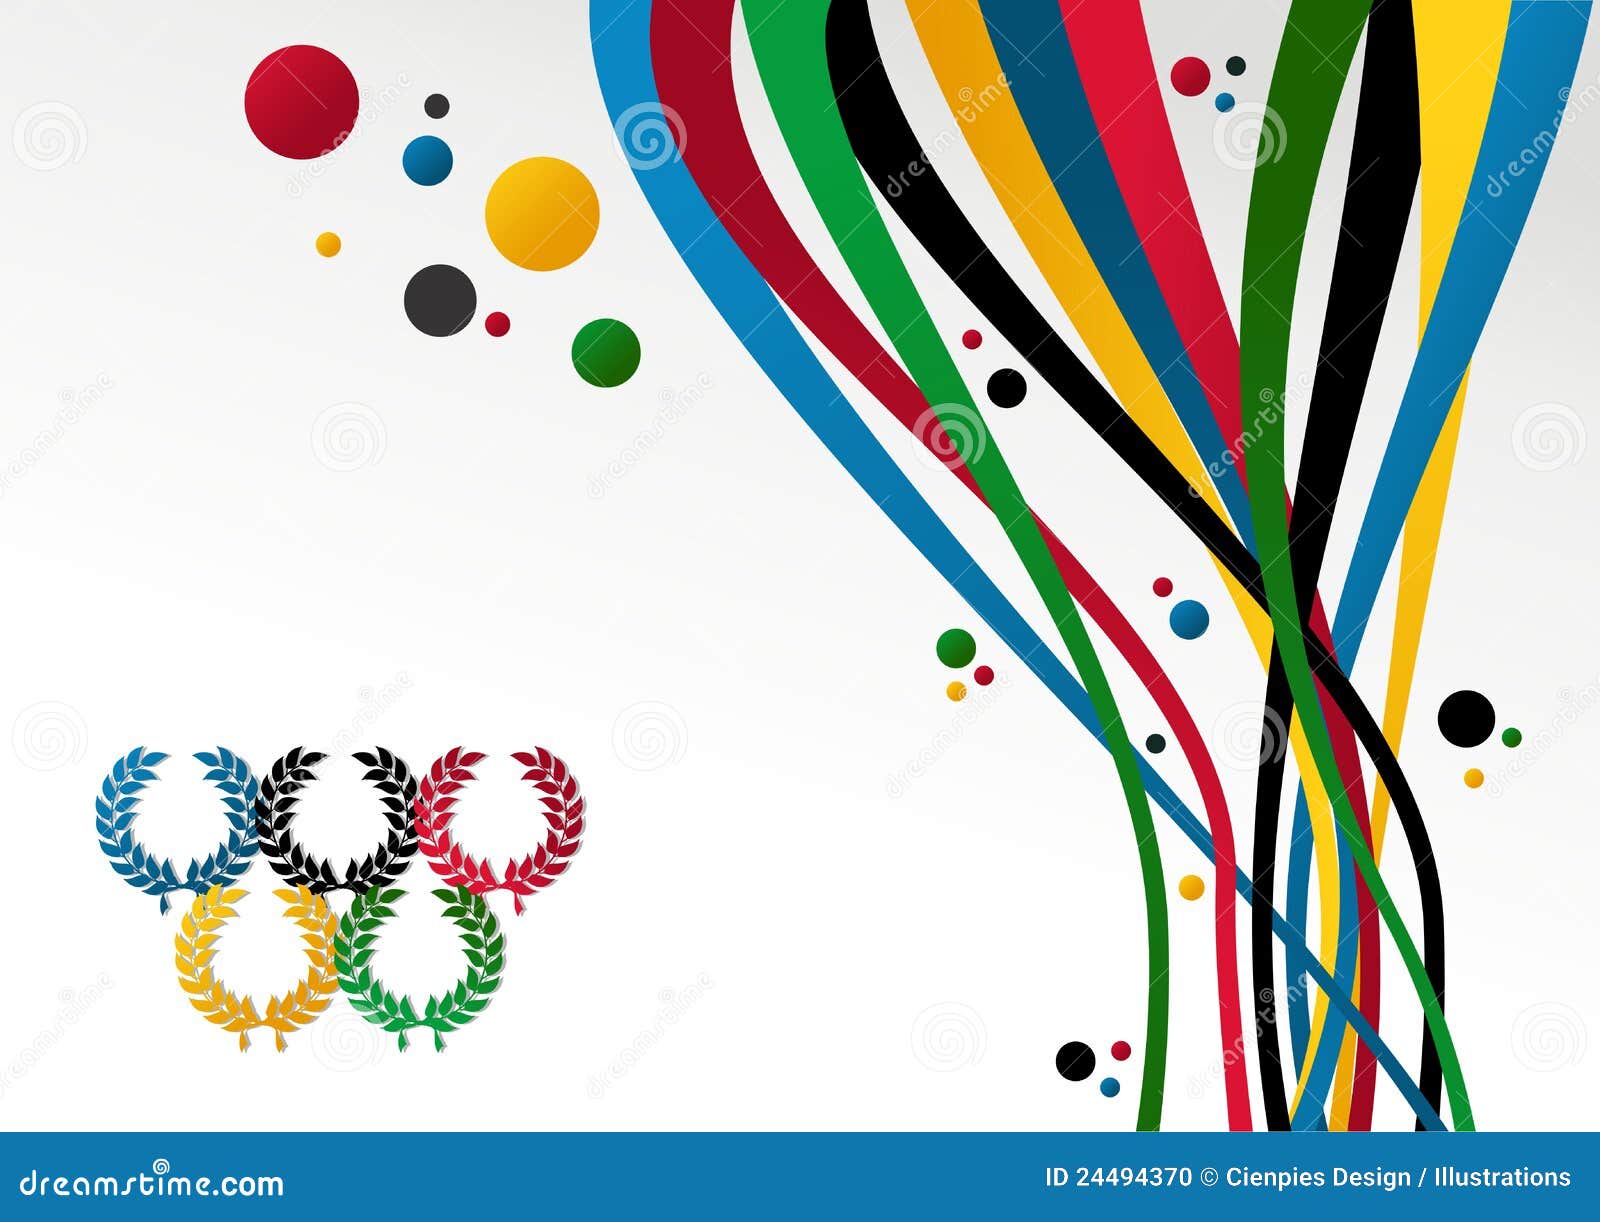 usa olympic clipart - photo #33